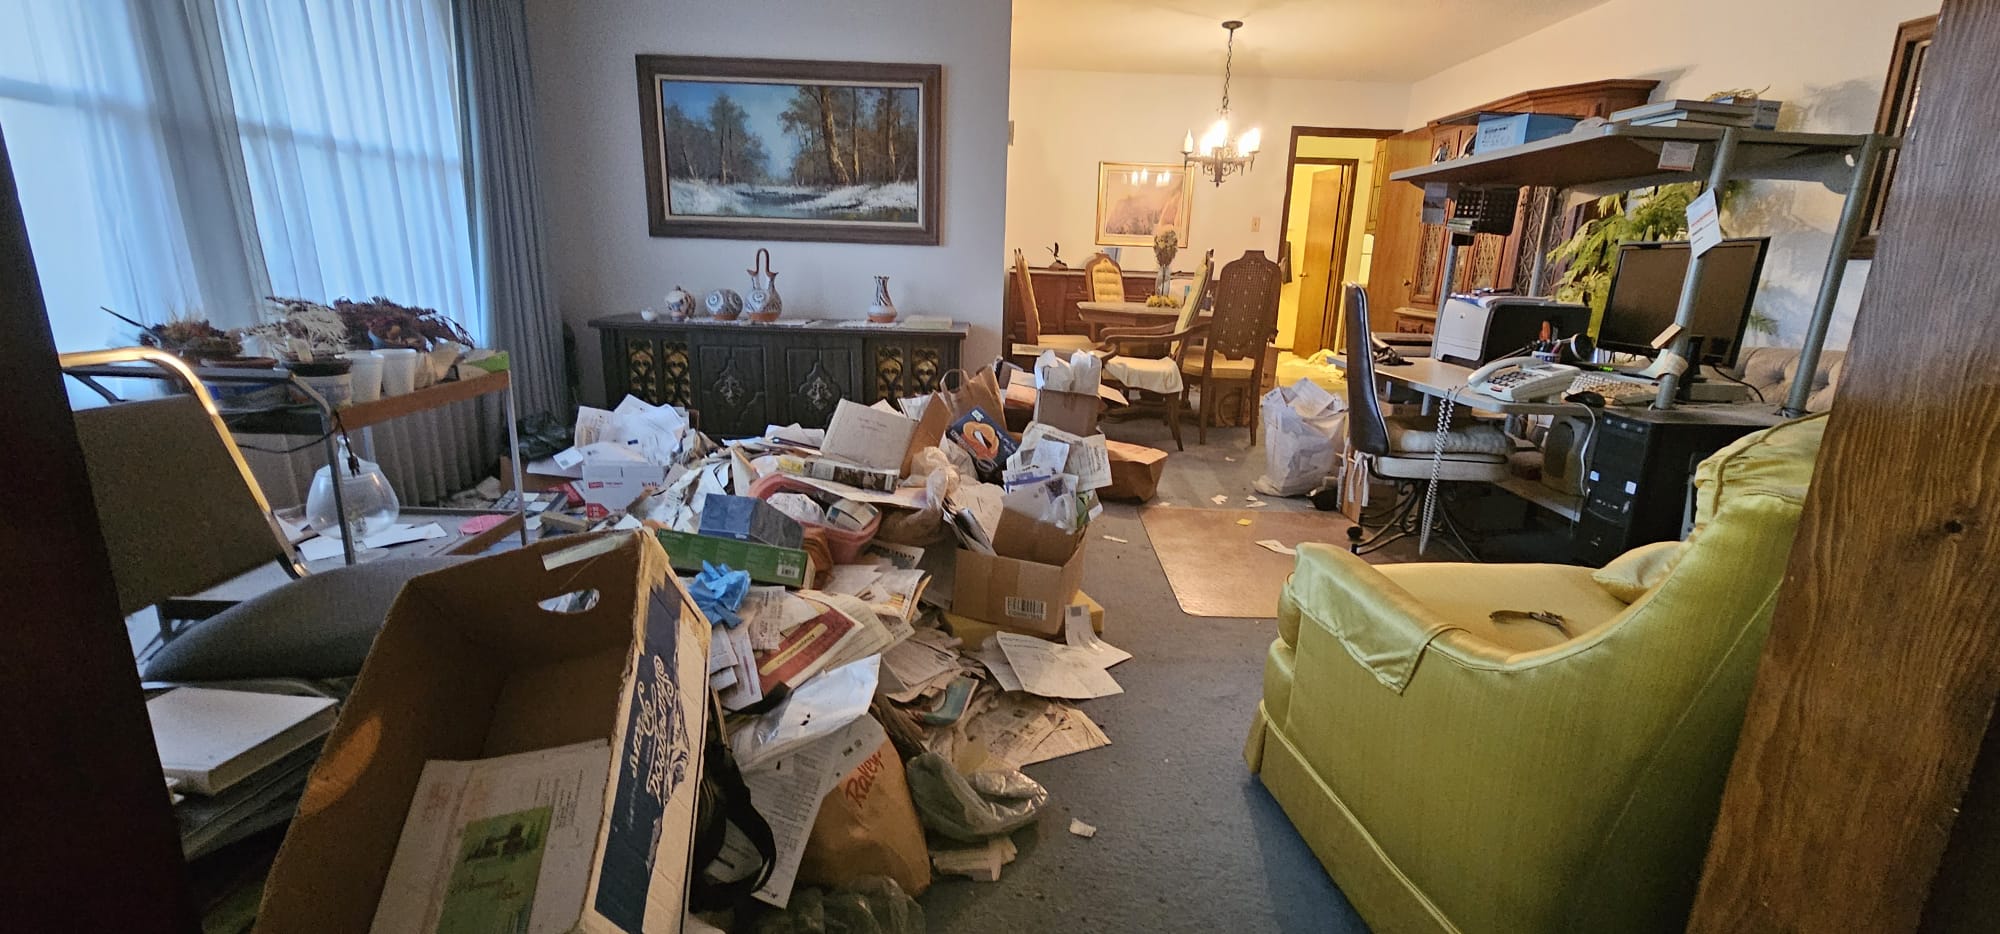 Hoarder Cleanup Services in Albuquerque NM